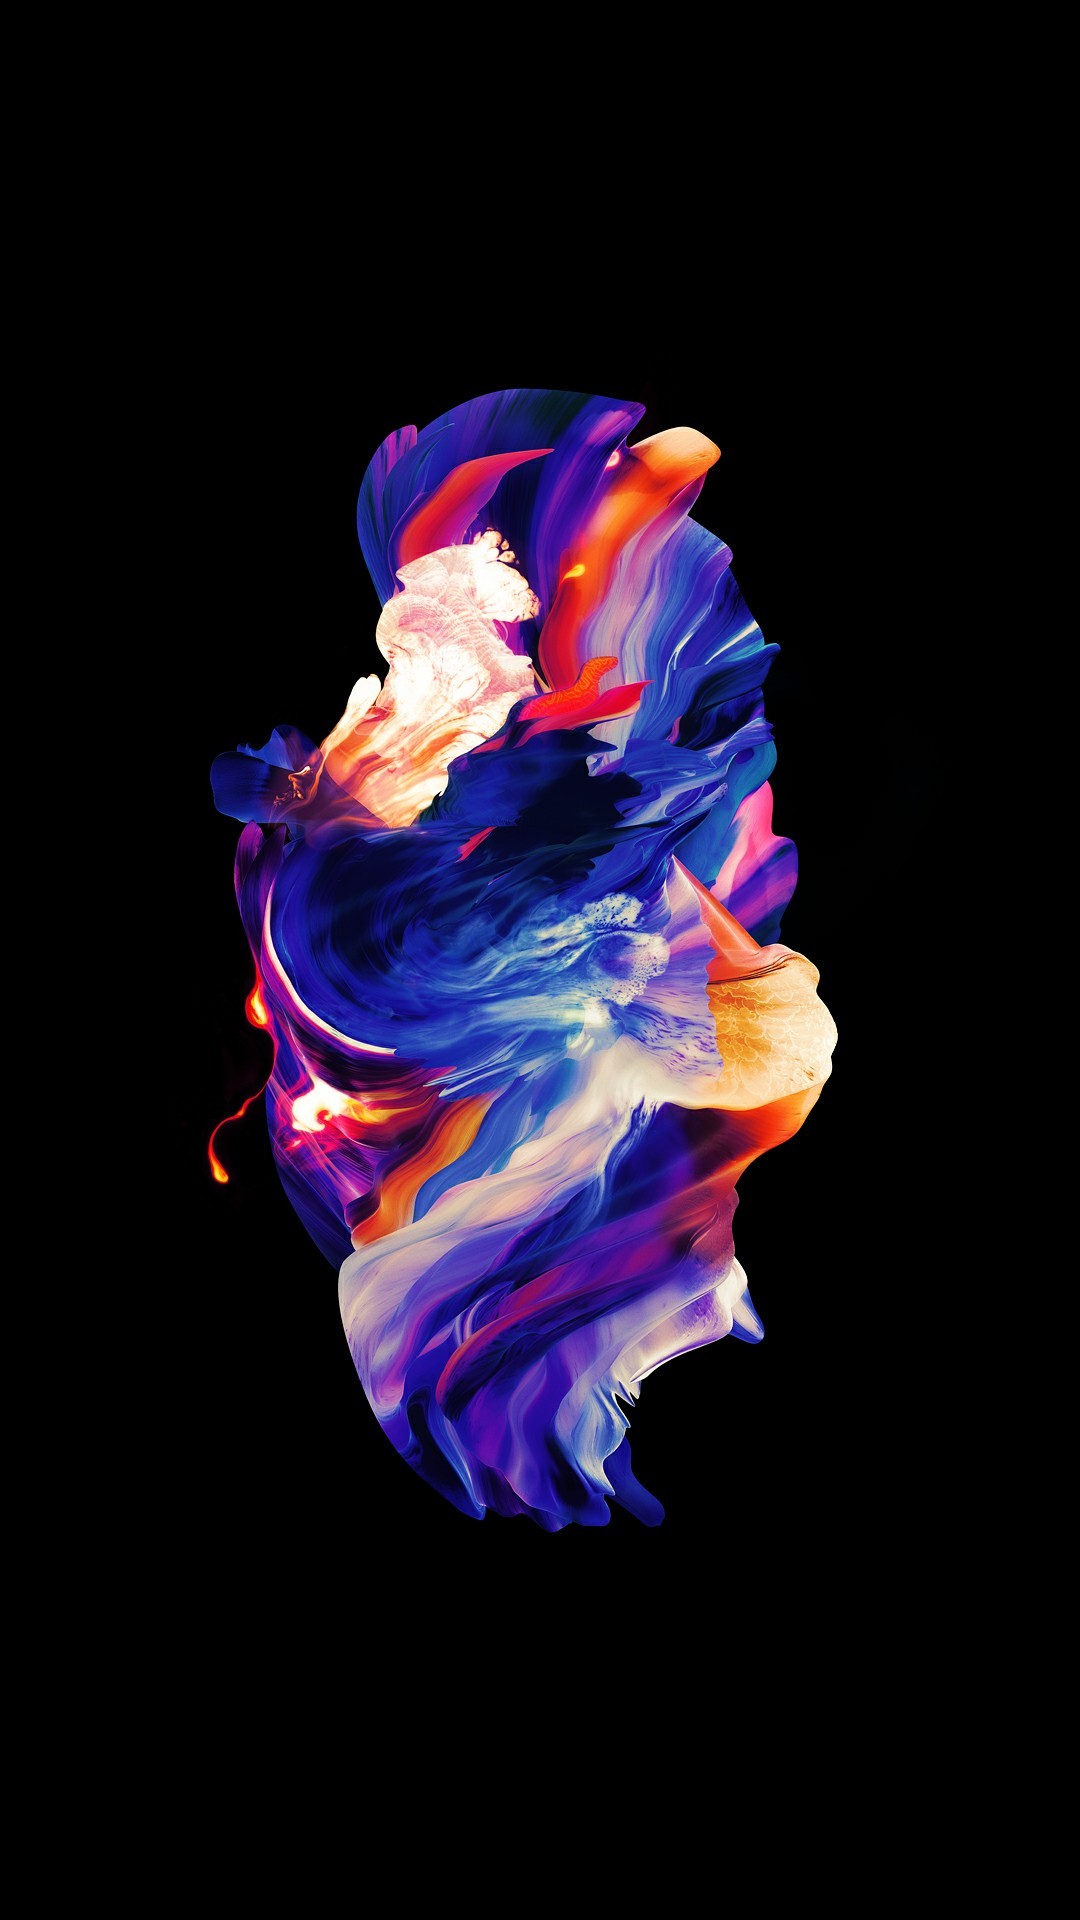 1080x1920 Dark Colorful - Tap to see more beautifully colored wallpapers!